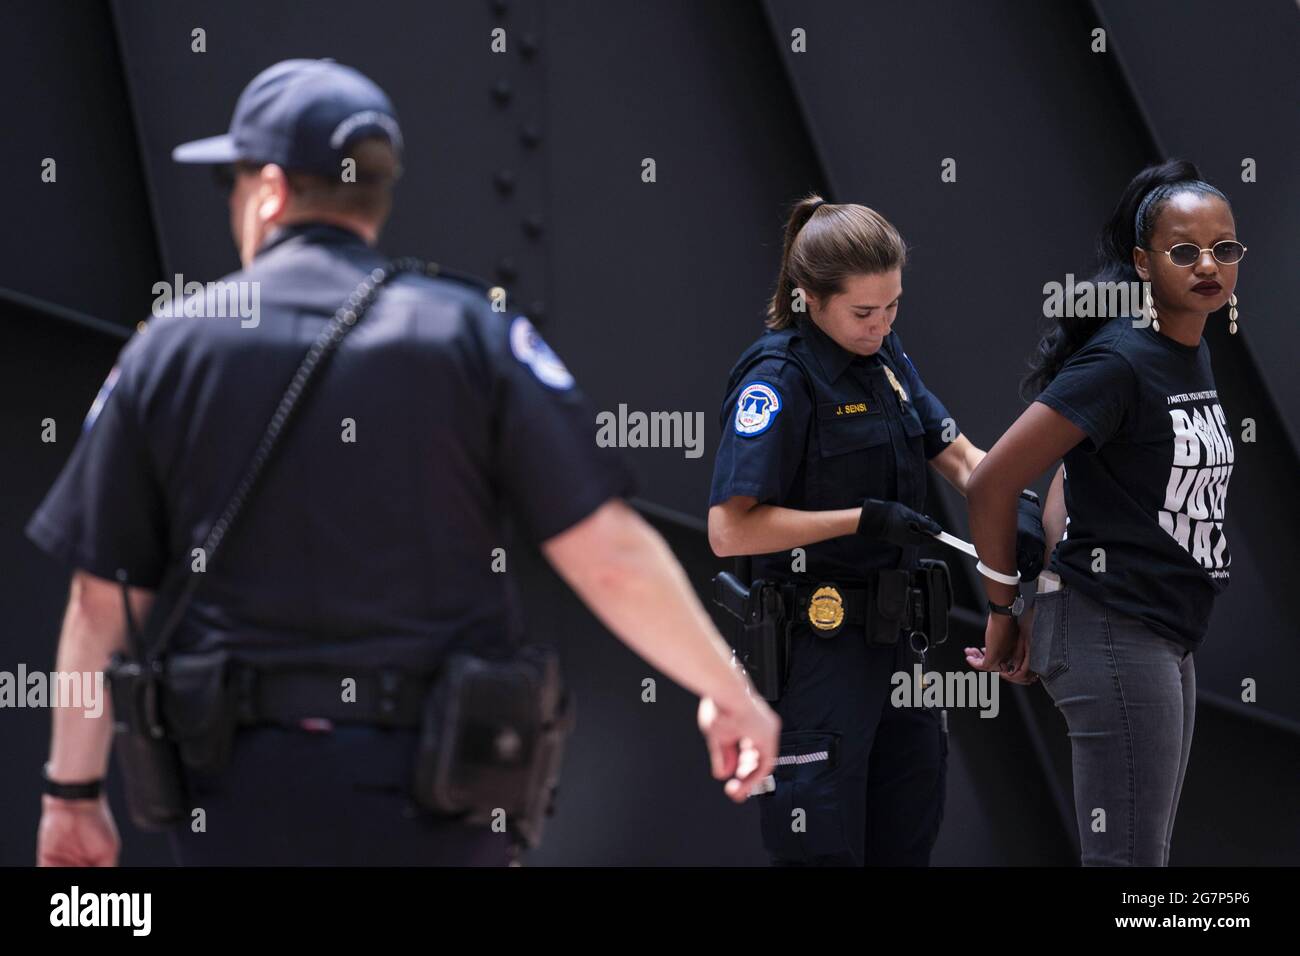 Washington, United States. 15th July, 2021. An activist is arrested during a protest in support of voting rights in the atrium of Hart Senate Office Building on Capitol Hill in Washington, DC on Thursday, July 15, 2021. Republican lawmakers around the country have introduced legislation that make it more difficult for voters to cast ballots. Photo by Sarah Silbiger/UPI Credit: UPI/Alamy Live News Stock Photo